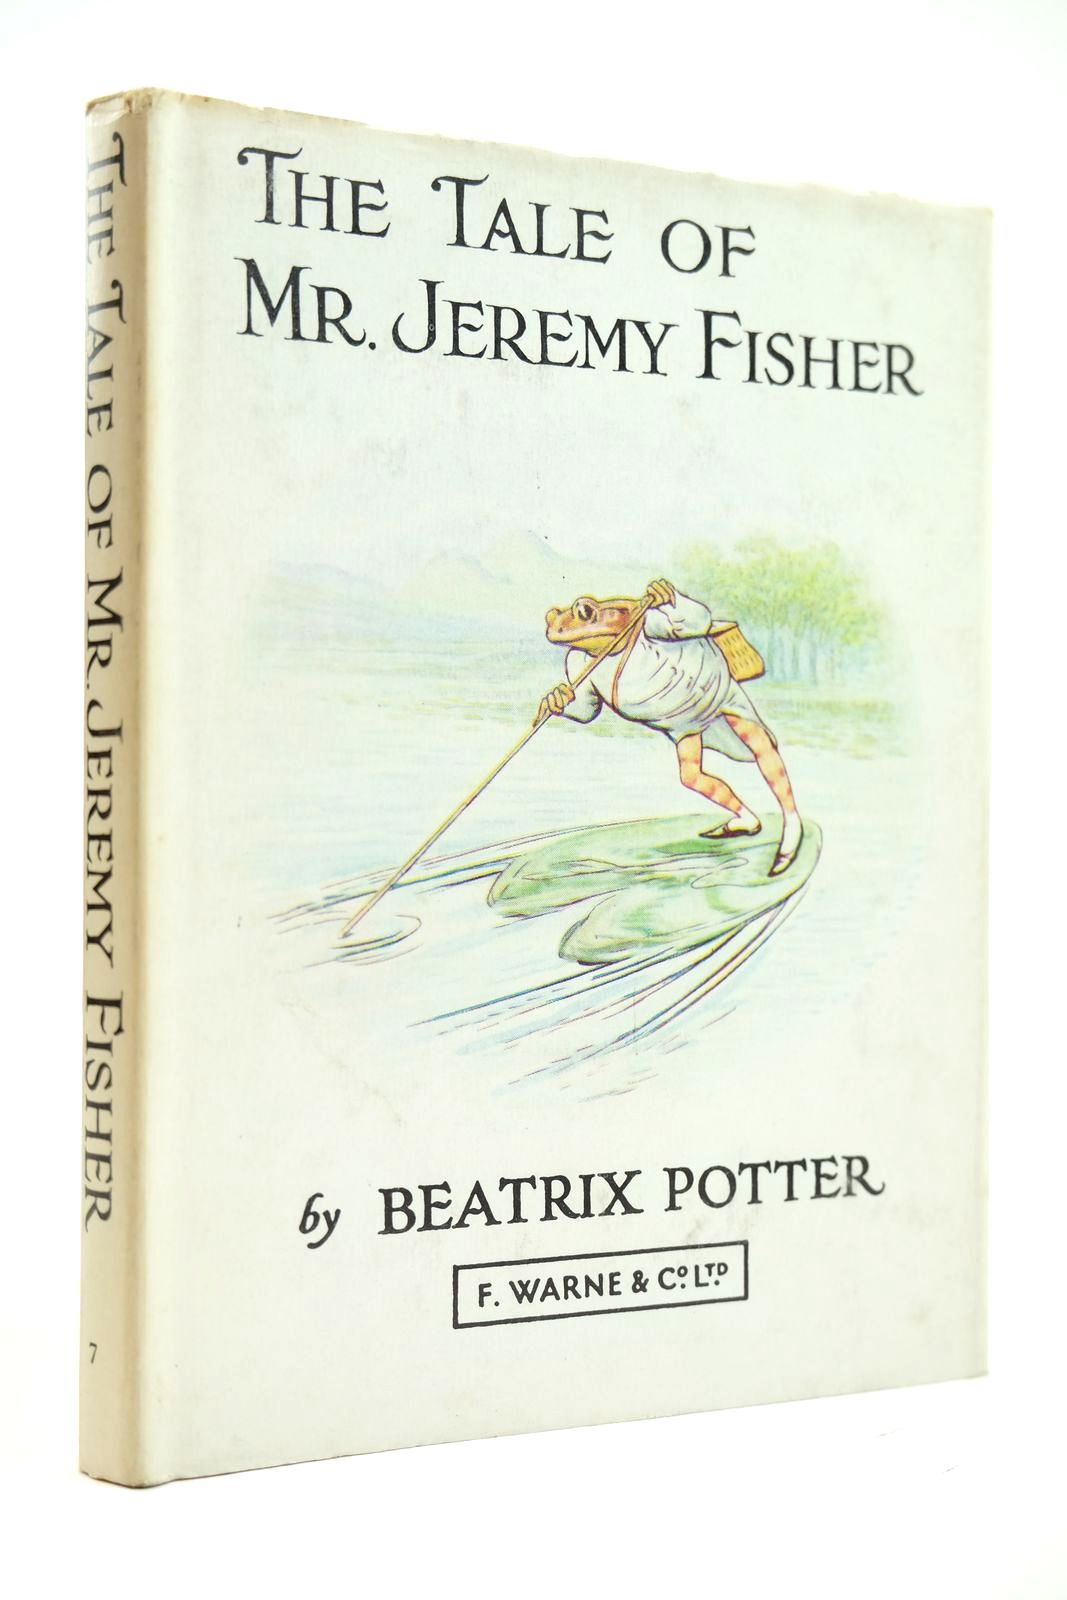 Photo of THE TALE OF MR. JEREMY FISHER written by Potter, Beatrix illustrated by Potter, Beatrix published by Frederick Warne & Co Ltd. (STOCK CODE: 2131896)  for sale by Stella & Rose's Books